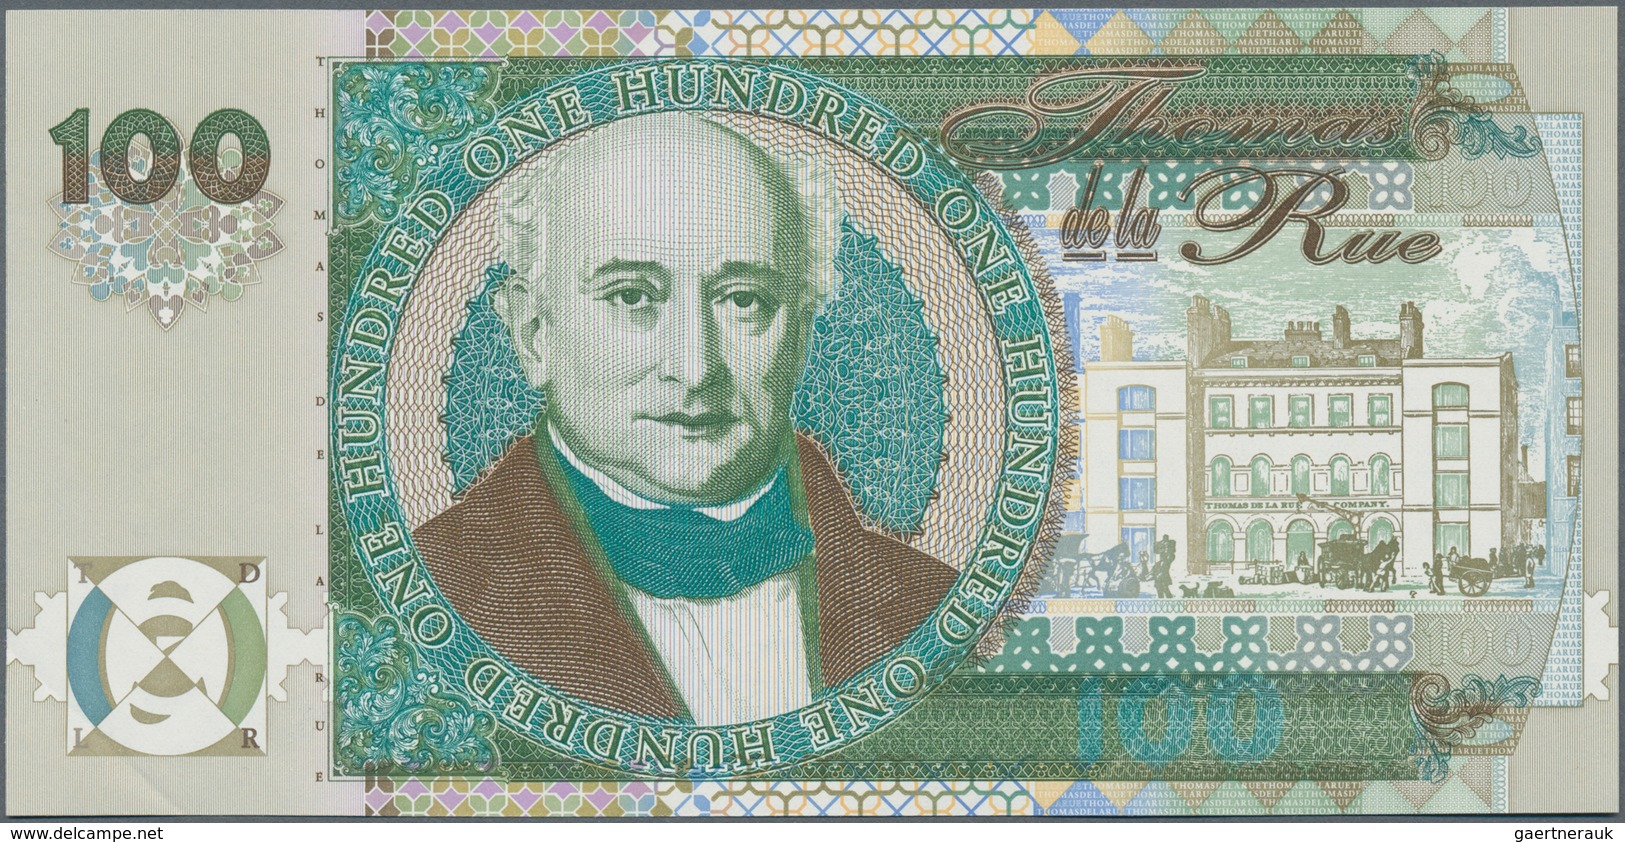 Testbanknoten: Huge Lot With 56 Pcs. Testnotes, Advertising Notes And Watermark Paper, Comprising Fo - Specimen